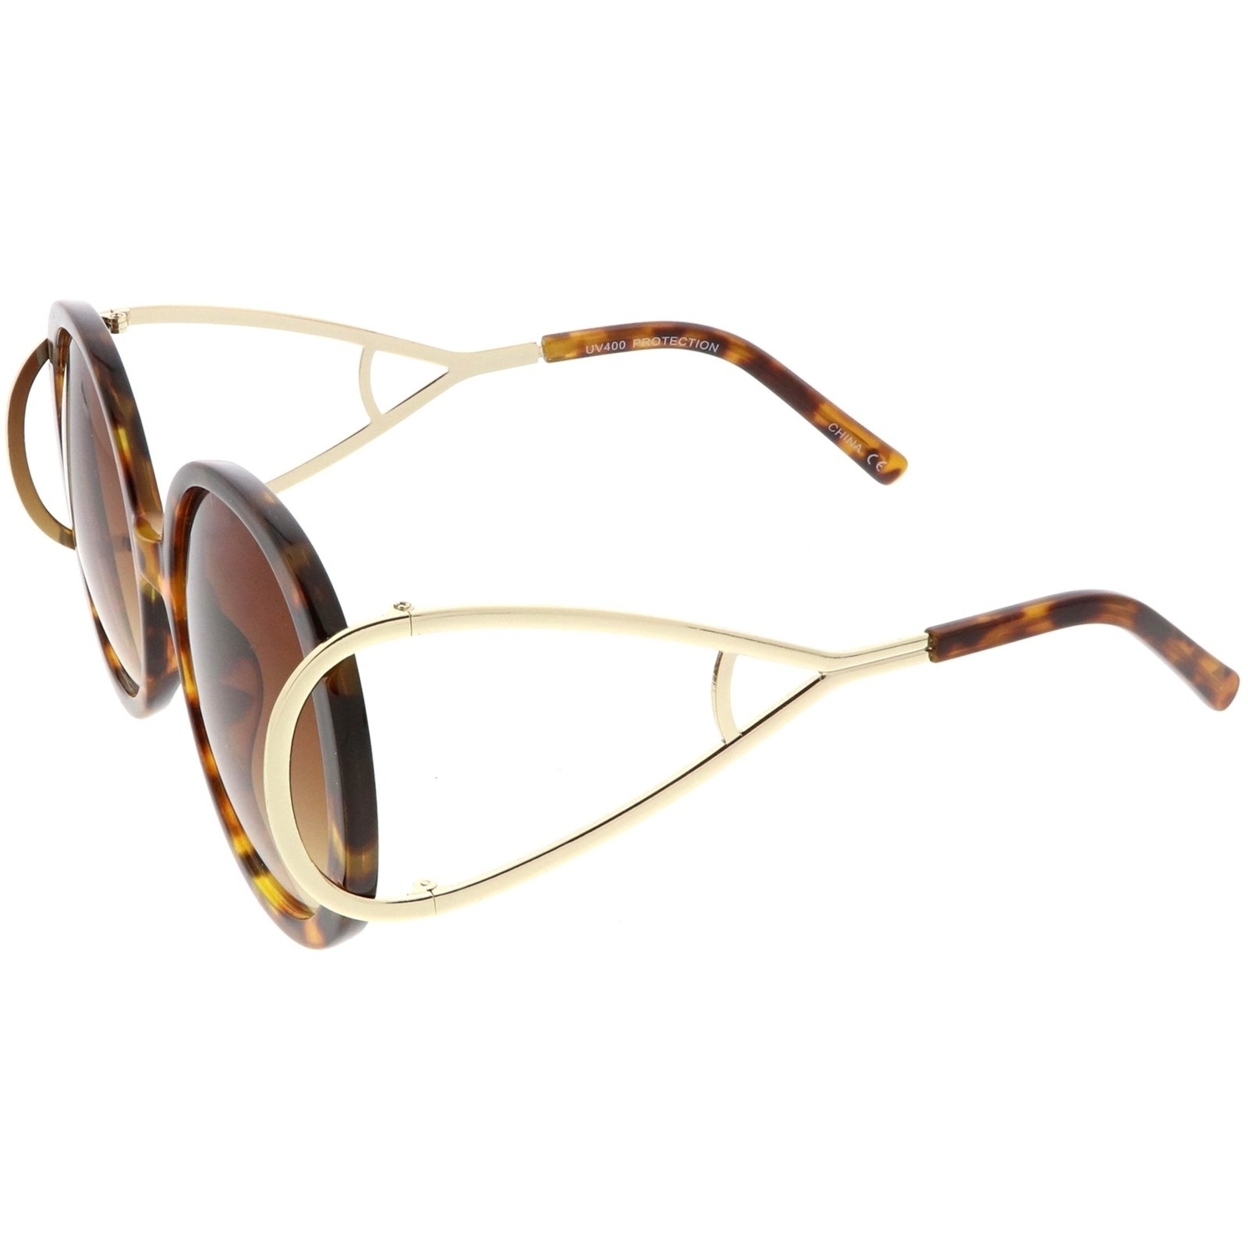 Women's Chunky Round Sunglasses Open Metal Arms Neutral Colored Lens 55mm - Tortoise Gold / Amber